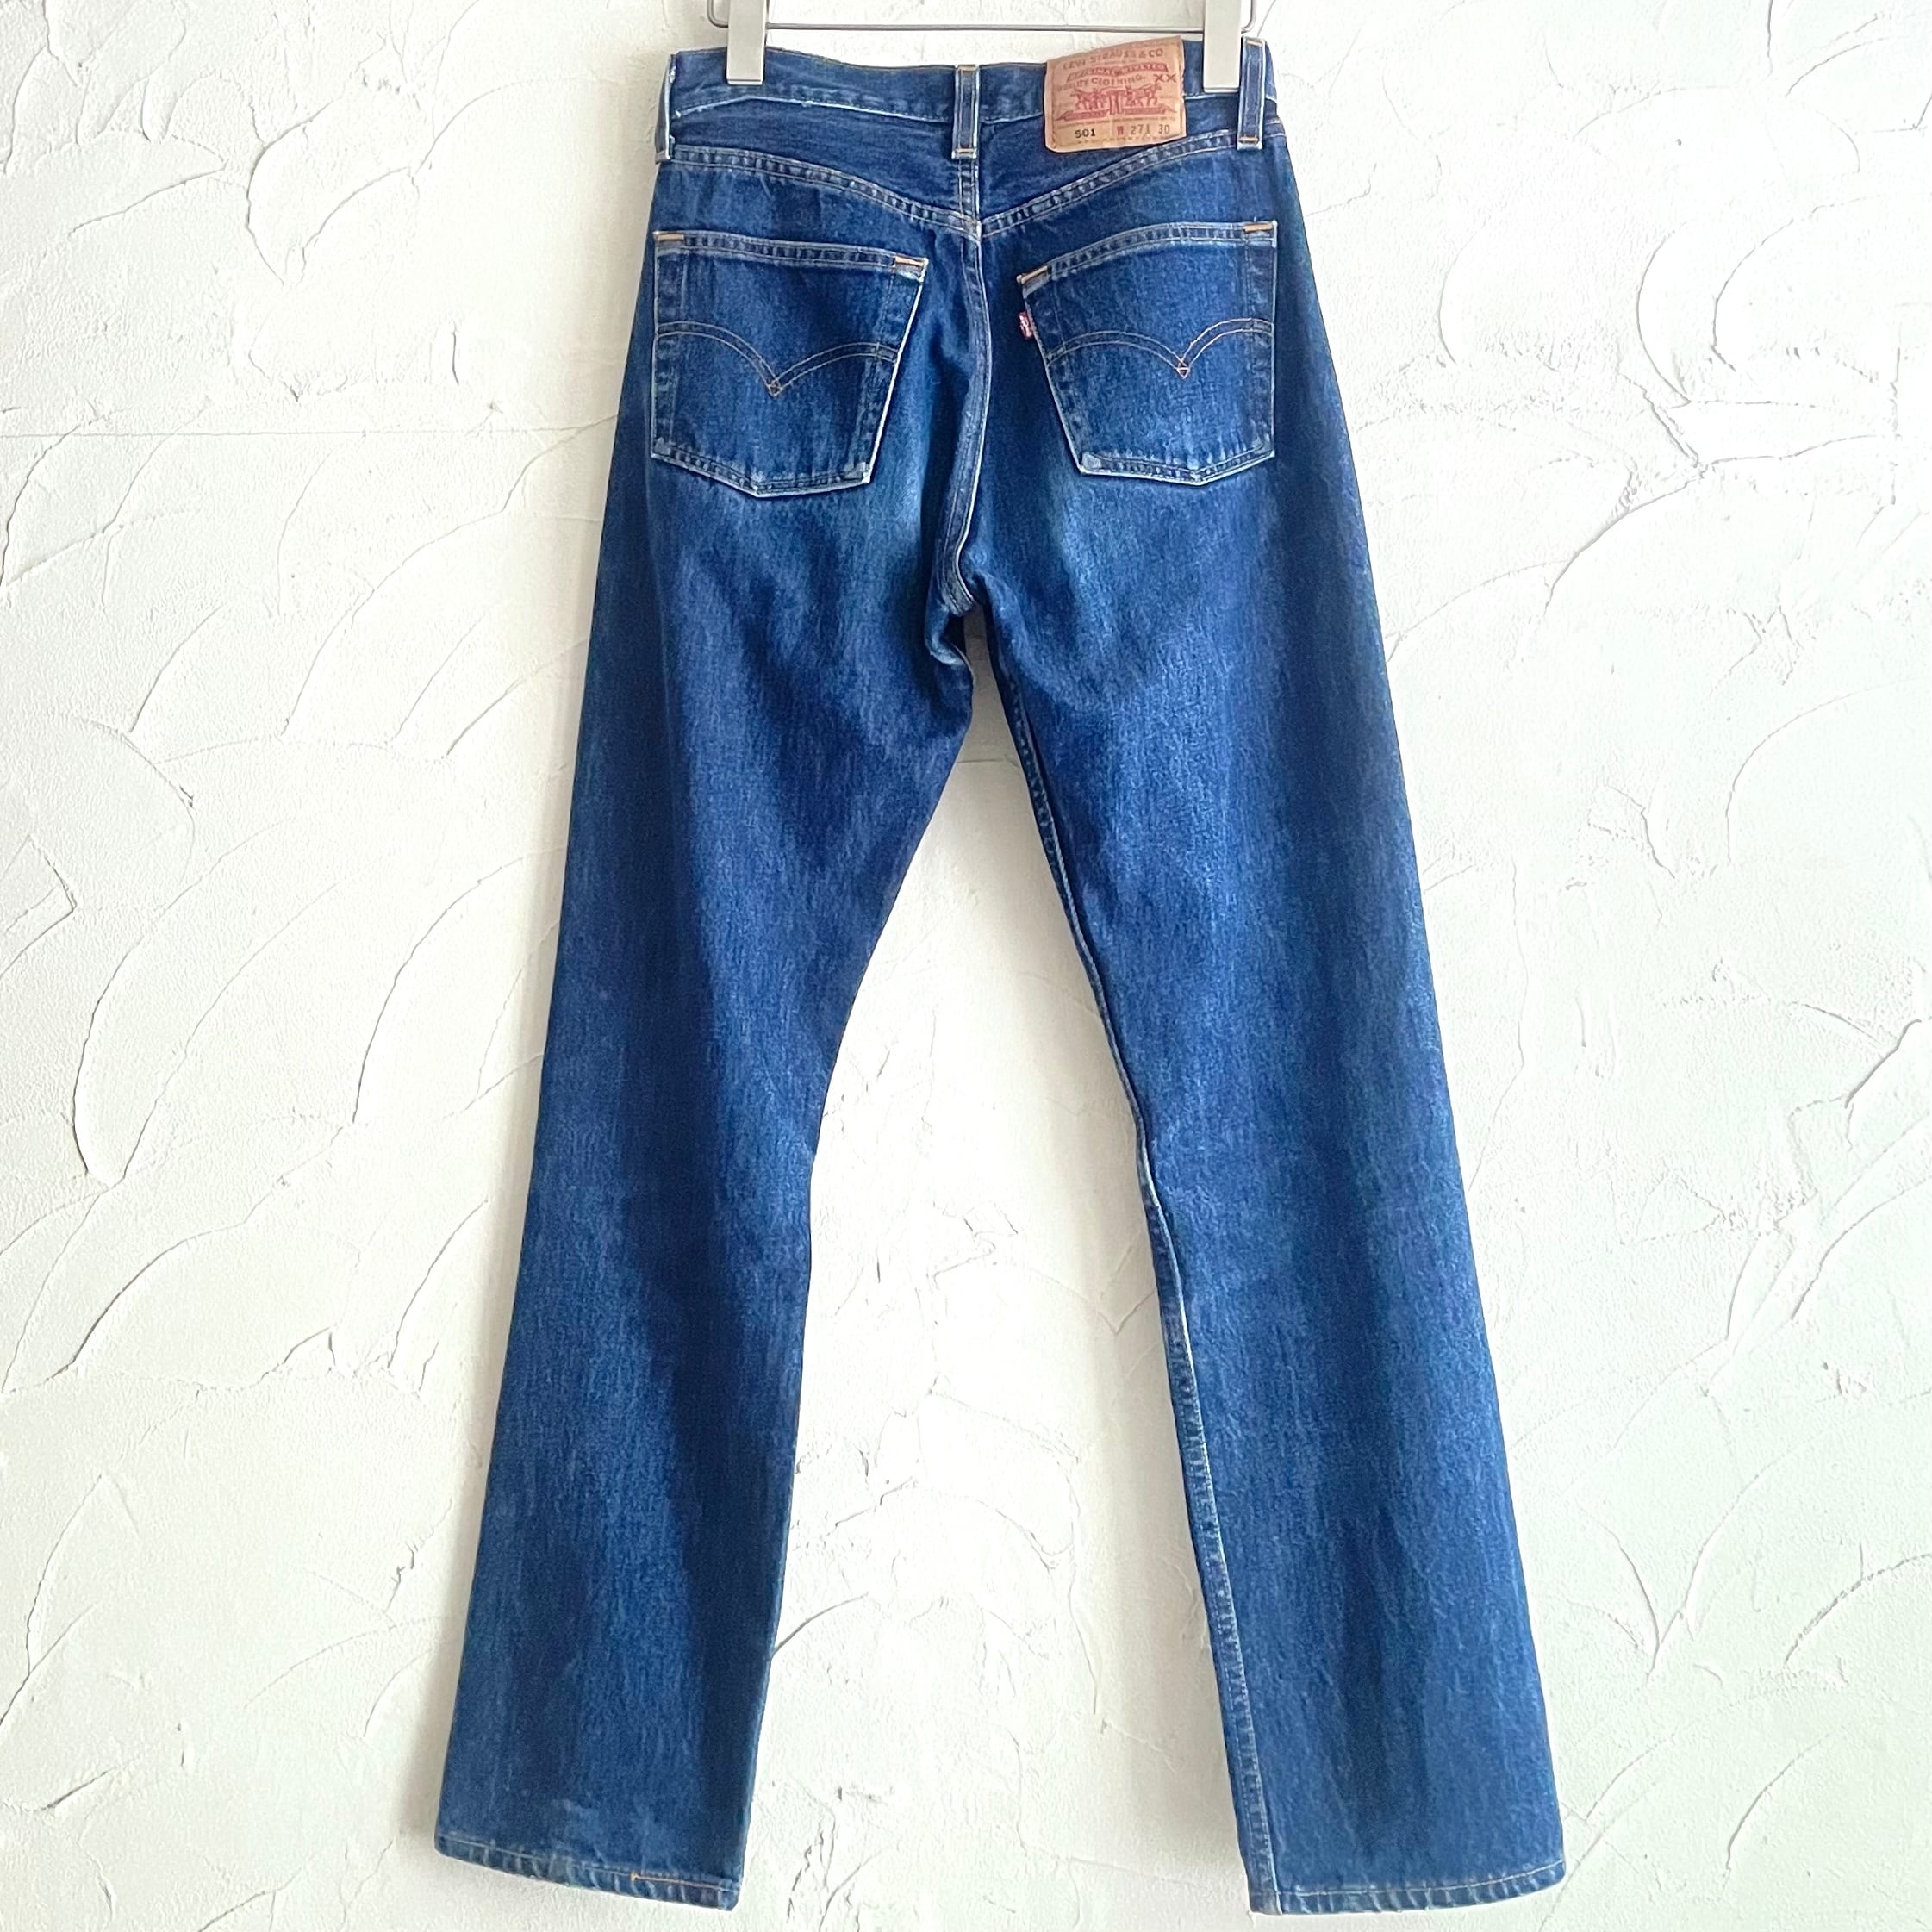 Made in USA Levi's 501 denim pants W27